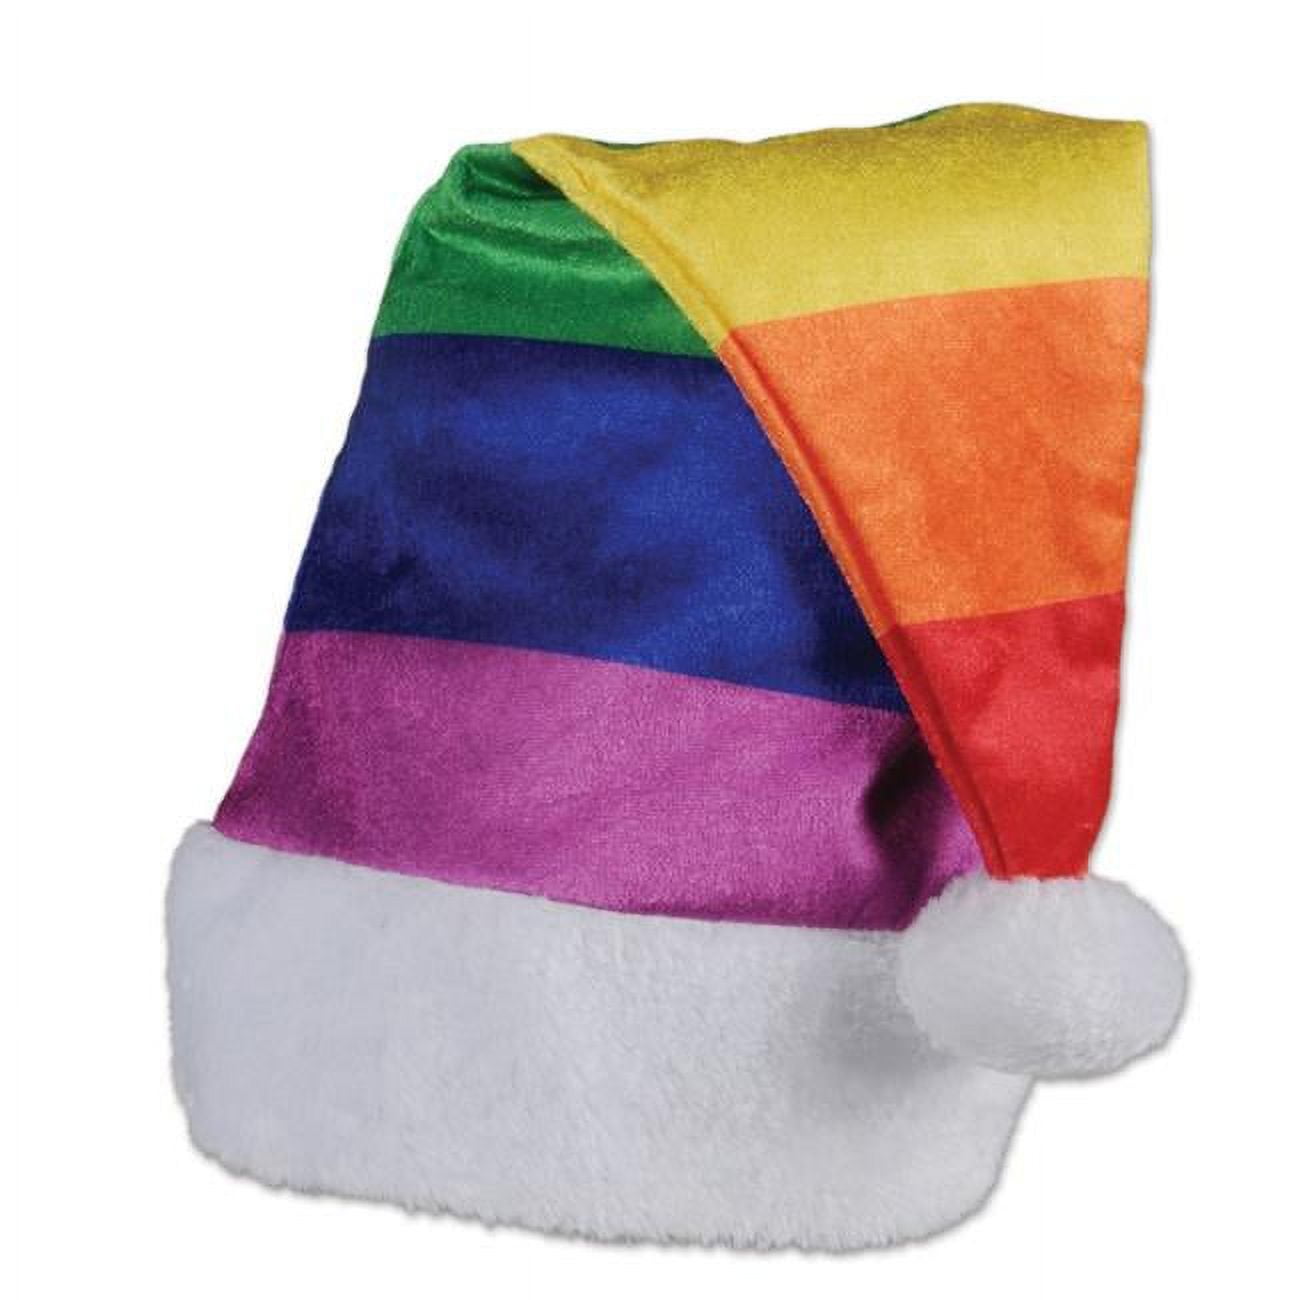 Rainbow Friends - Holidays Cute Animals in Santa Hats, Recyclable Wr –  LisetteArt Shop